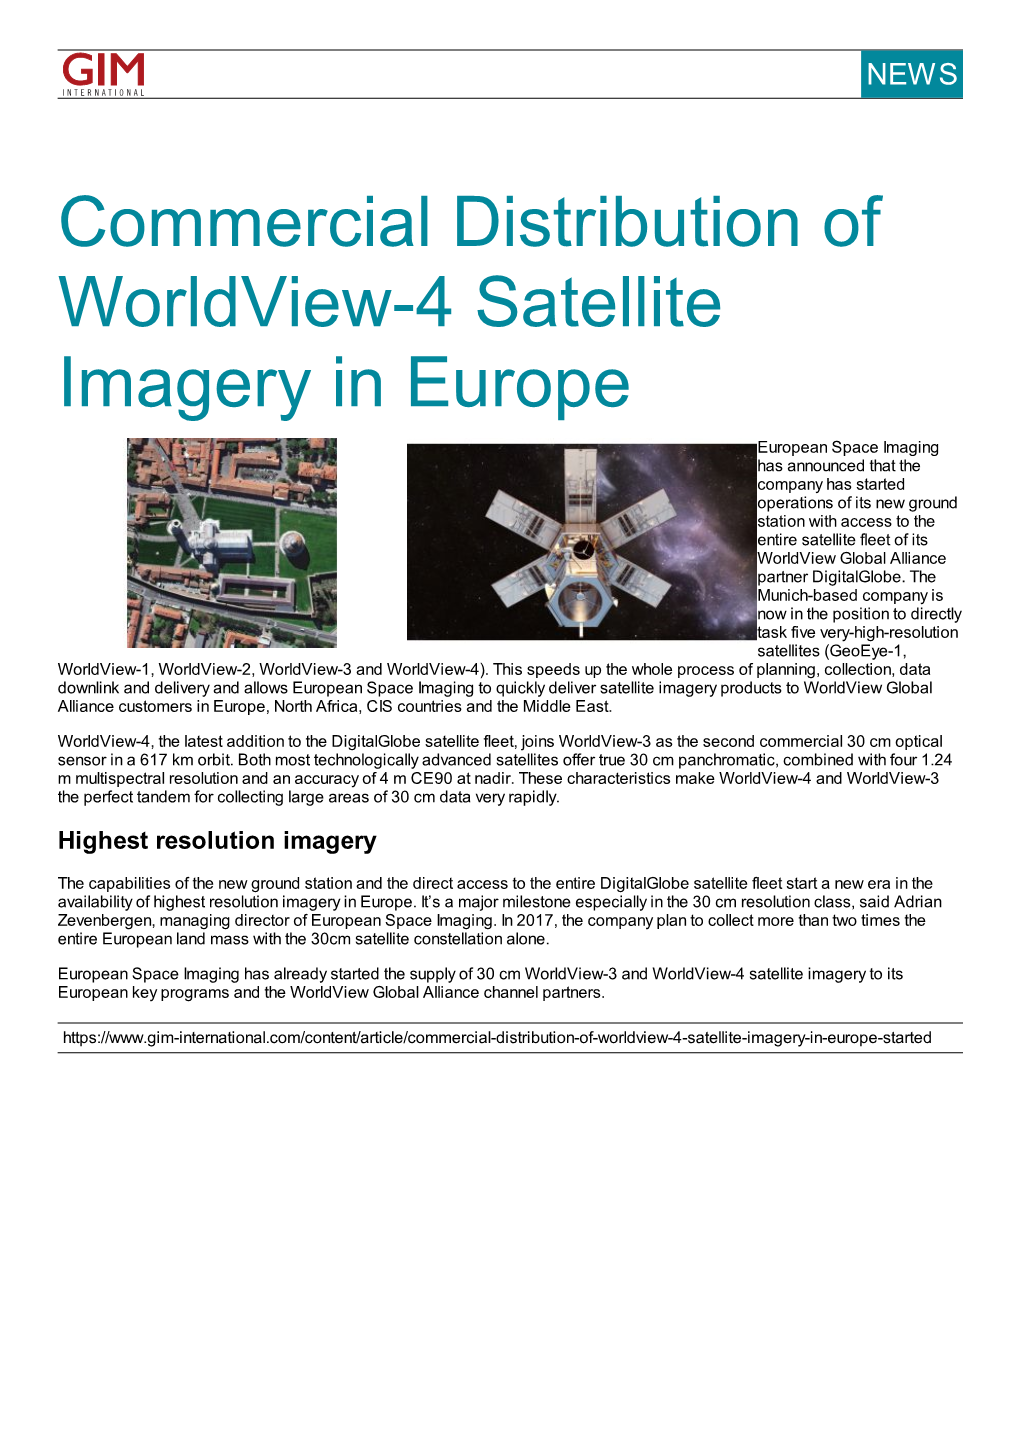 Commercial Distribution of Worldview-4 Satellite Imagery in Europe